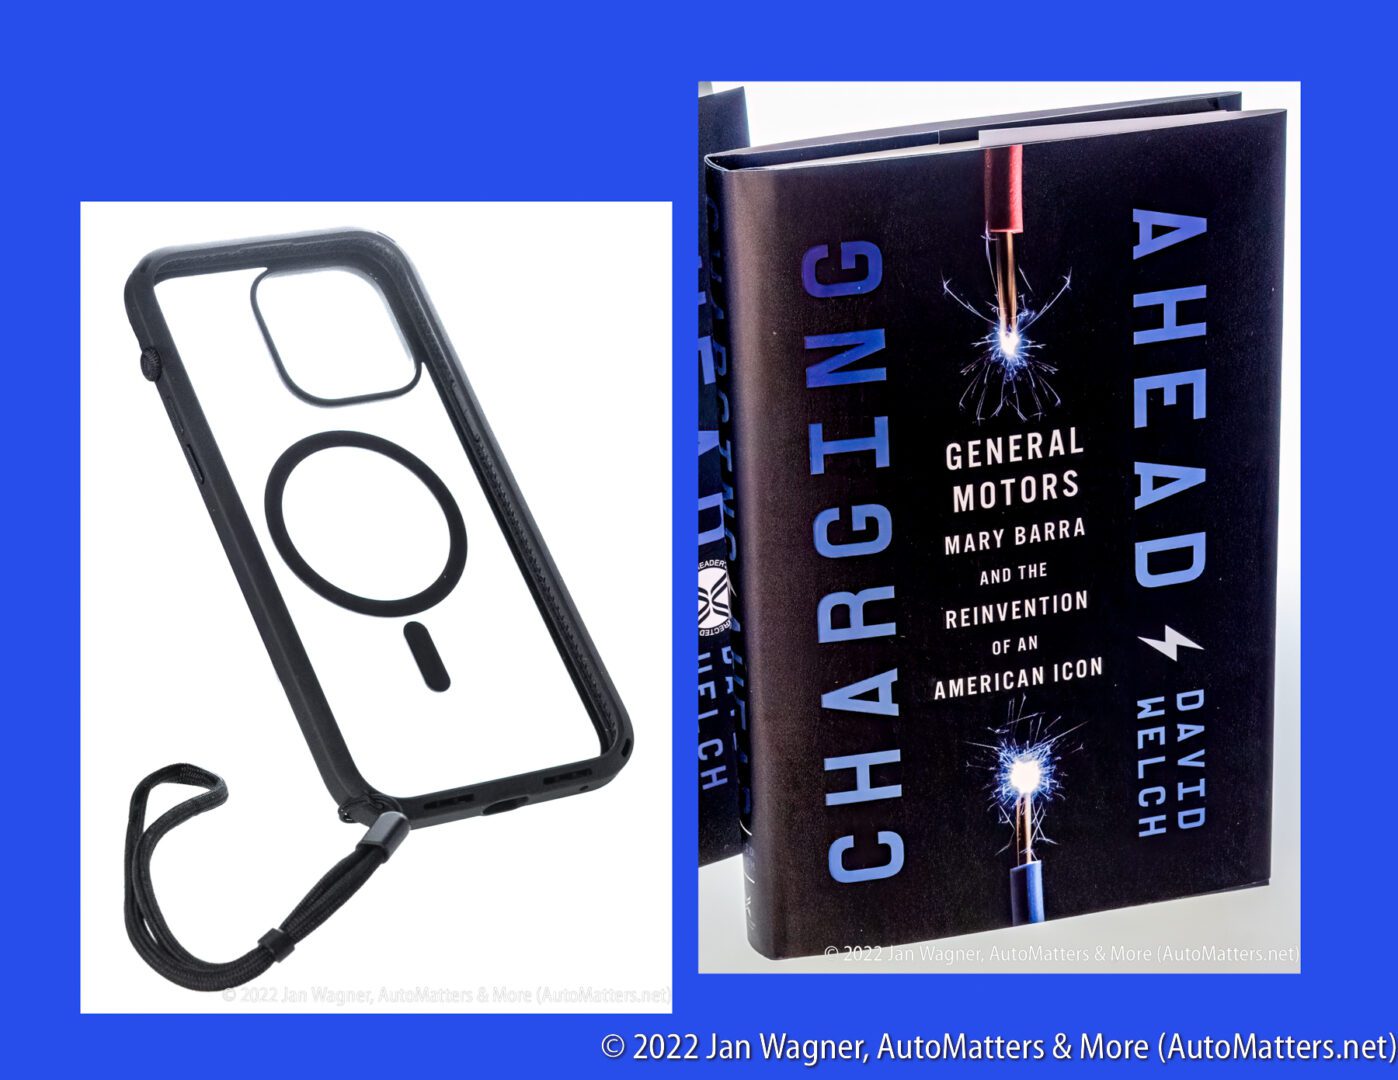 c J Wagner-20221026_202141-02114-Product displays—Catalyst iPhone 14 Pro Max Magsafe case+book—Charging Ahead-GM Marry Barra & the Reinvention of an American Icon-R3--6in x 300dpi